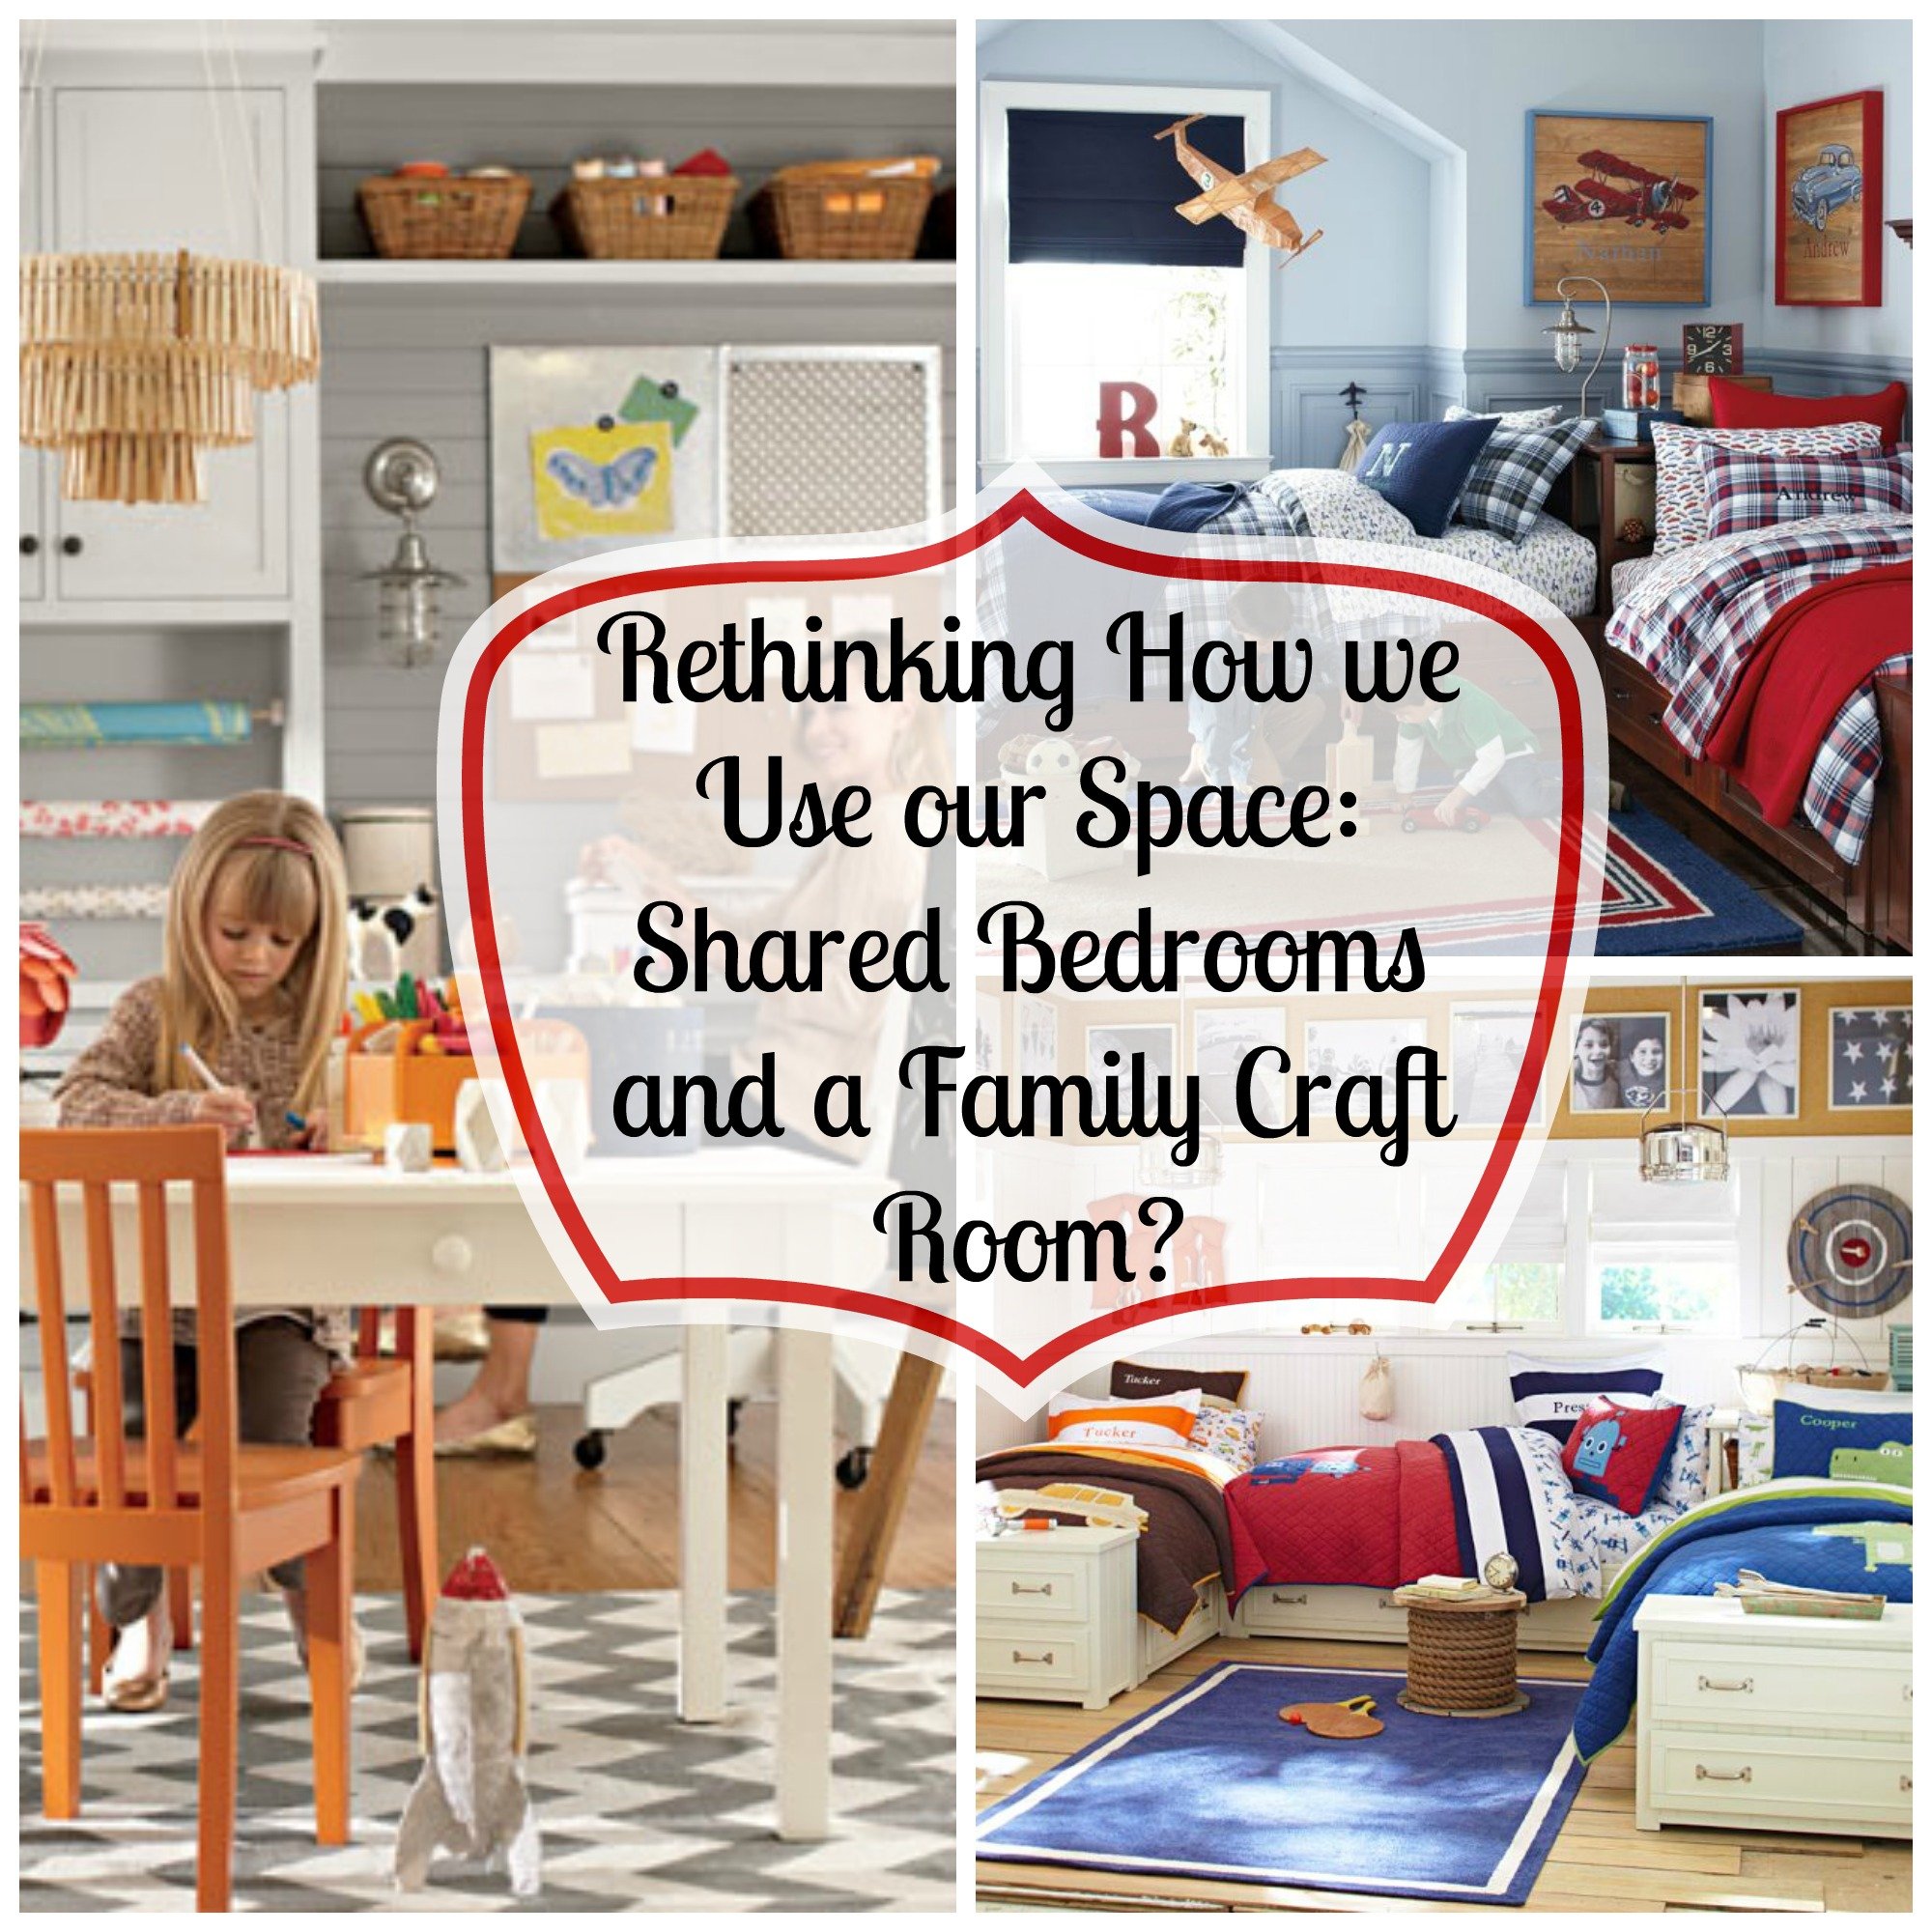 Rethinking How We Use our Space: A Shared Bedroom and a Family Craft Space?!?